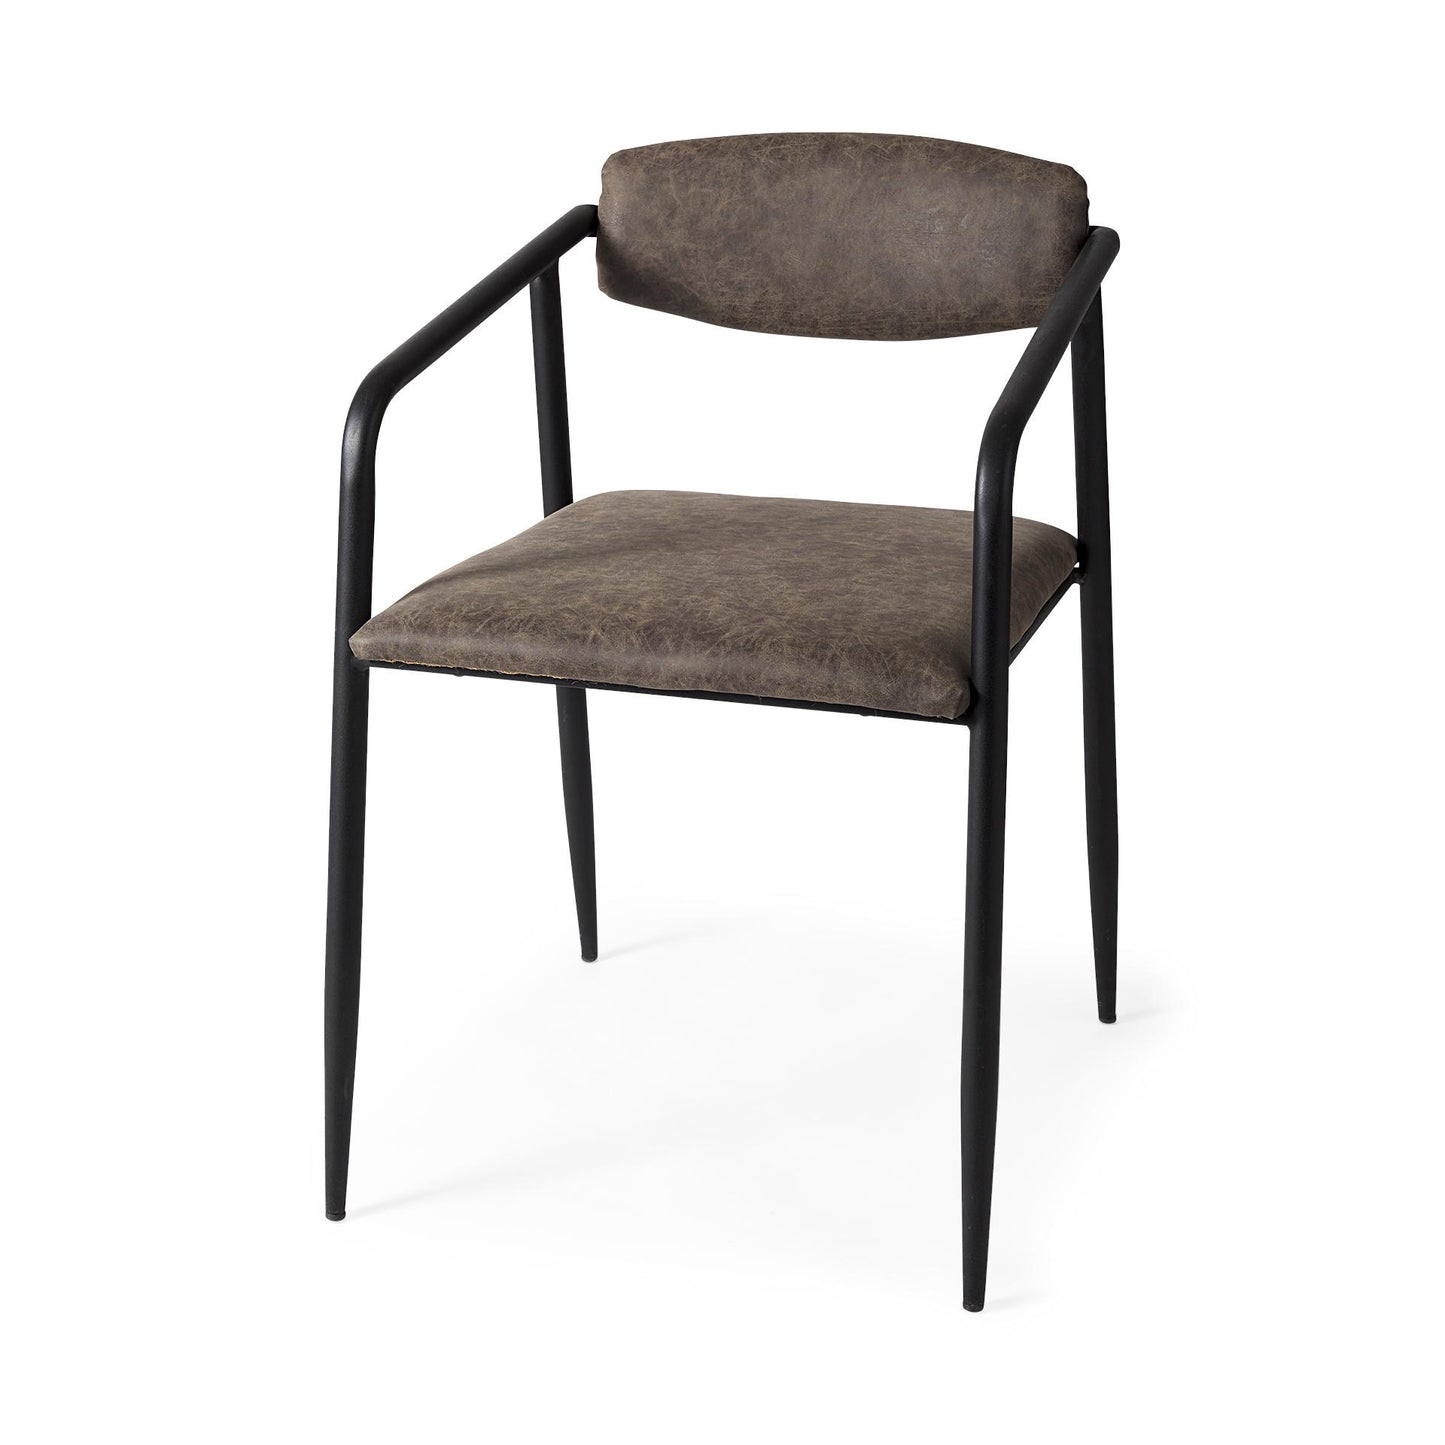 Langston Brown Faux-Leather Seat Black Iron Frame Dining Chair